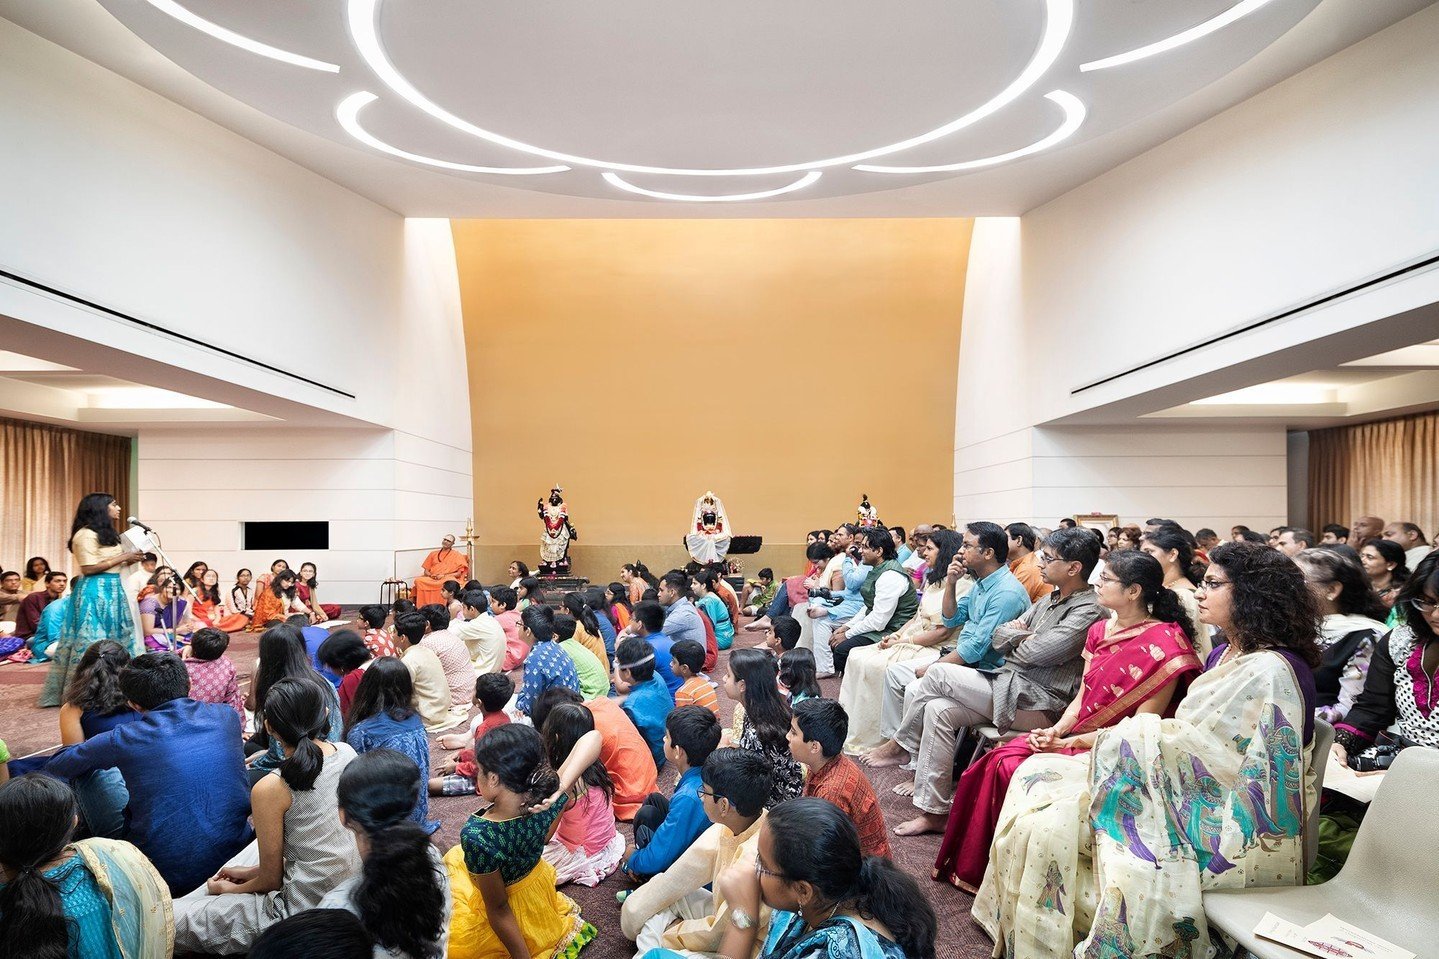 &quot;The Chinmaya Mission Austin puts simple architectural forms to exceptionally strong use, drawing from traditional typologies in new&mdash;and almost shockingly powerful&mdash;ways. The structures evoke the traditions of Hindu culture while disp